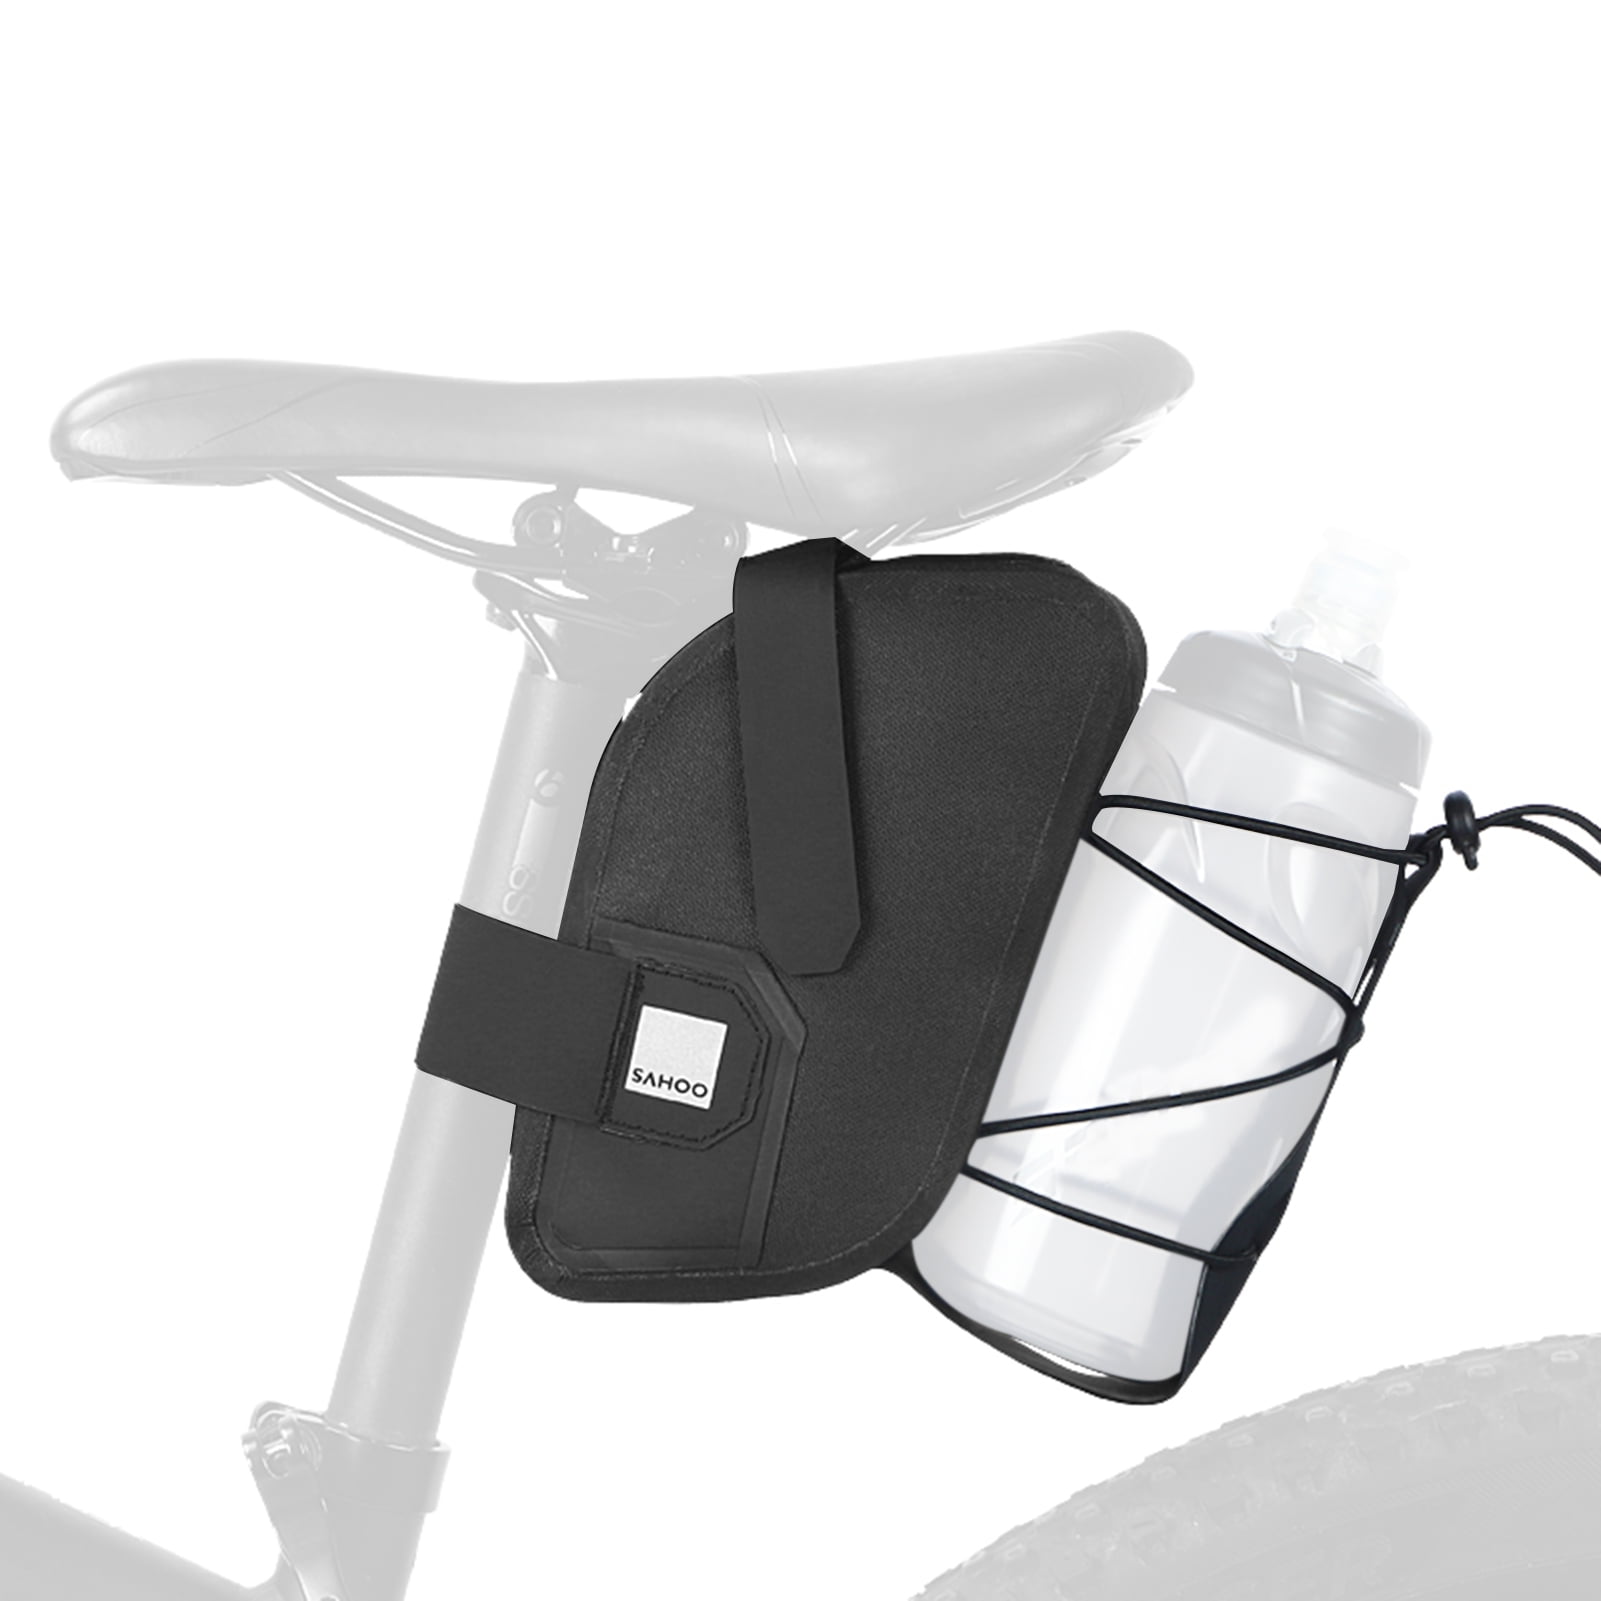 Cycling Outdoors Bike Saddle Bag Compact Bicycle Seat Bag Tail Rear Pouch Bag Under Seat Bag Portable Waterproof Storage Cycling Accessories for Mountain Bike Road Bike Racing car Everyday use 